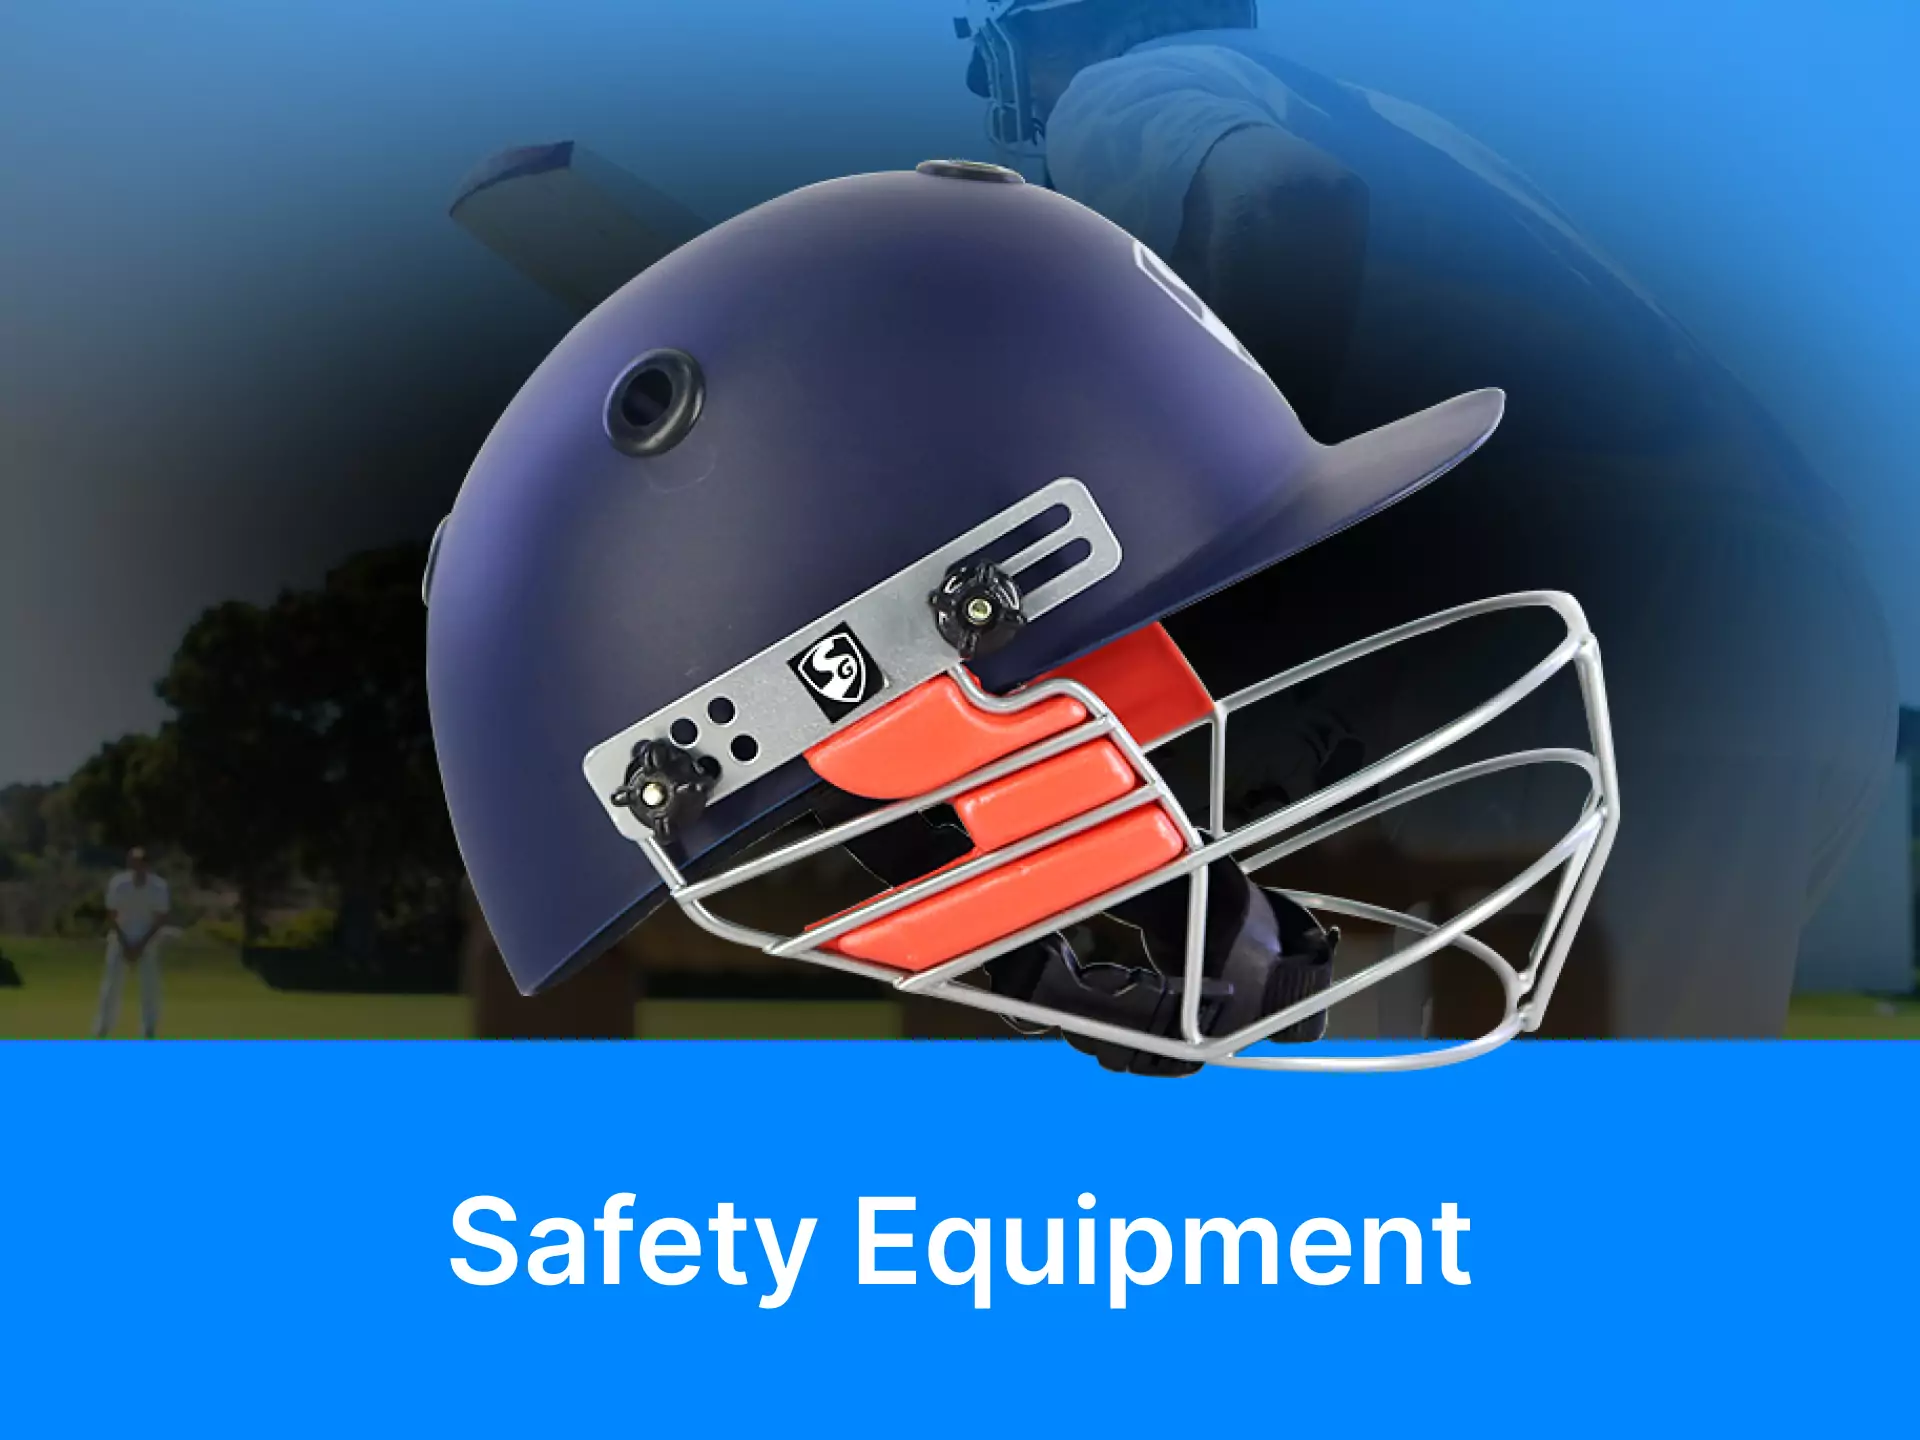 Read which equipment is designed for player safety.